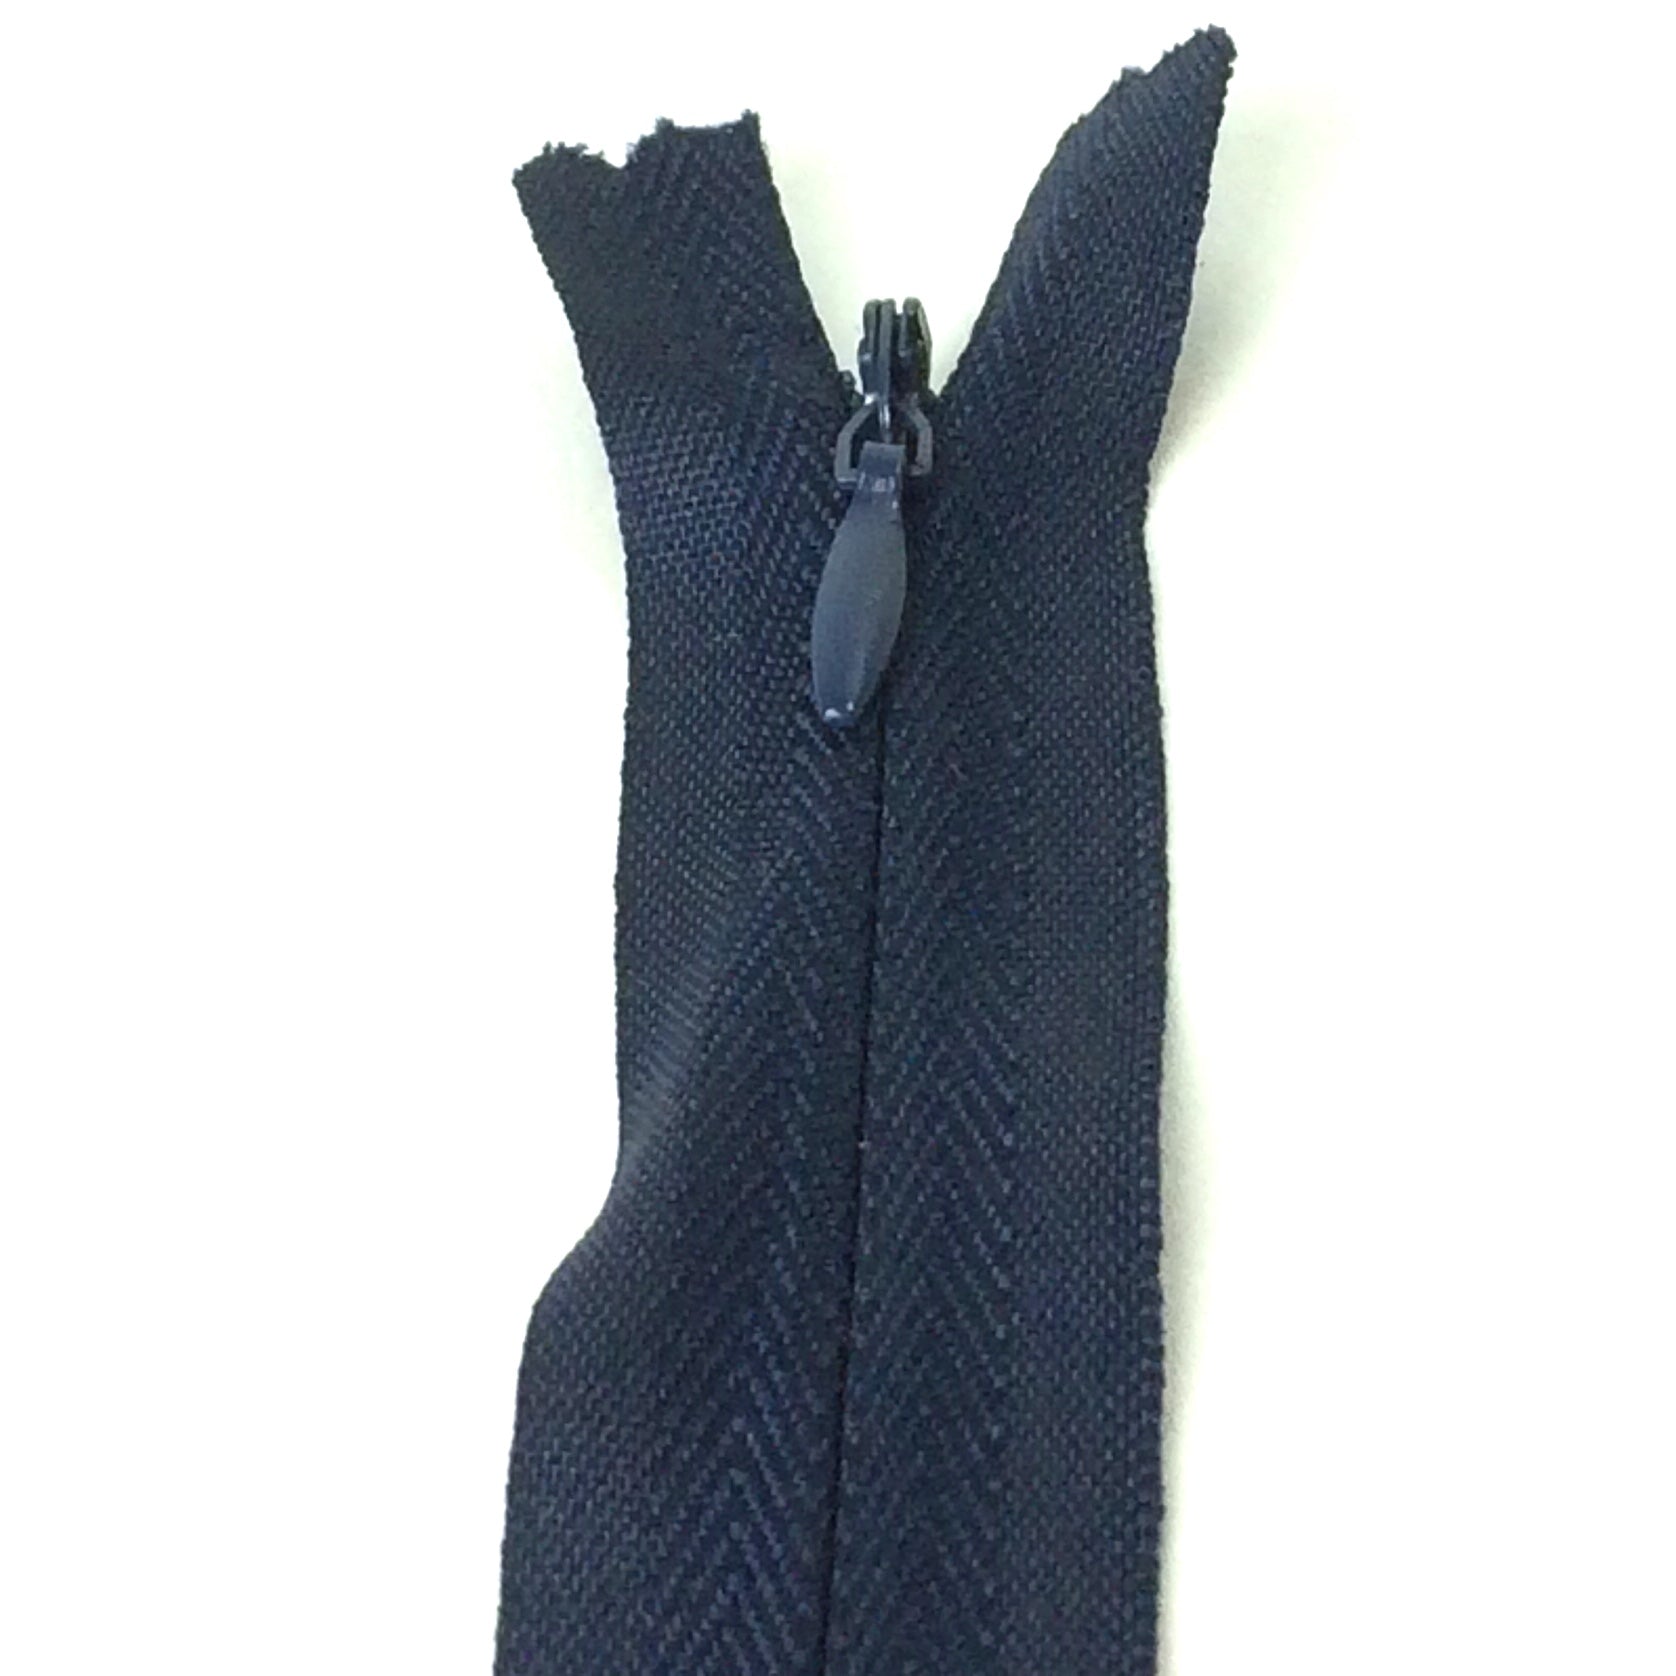 Photo of navy blue invisible or concealed zips available in many different colours and sizes. Great for achieving a professional finish in your products. Invisible zippers are perfect for dressmaking, cushions, crafts, etc., where you don't want your zipper showing. Installing them can be tricky without the right foot on your machine; a normal zipper foot is for installing standard zippers, while you will need an invisible zipper foot for a professional result